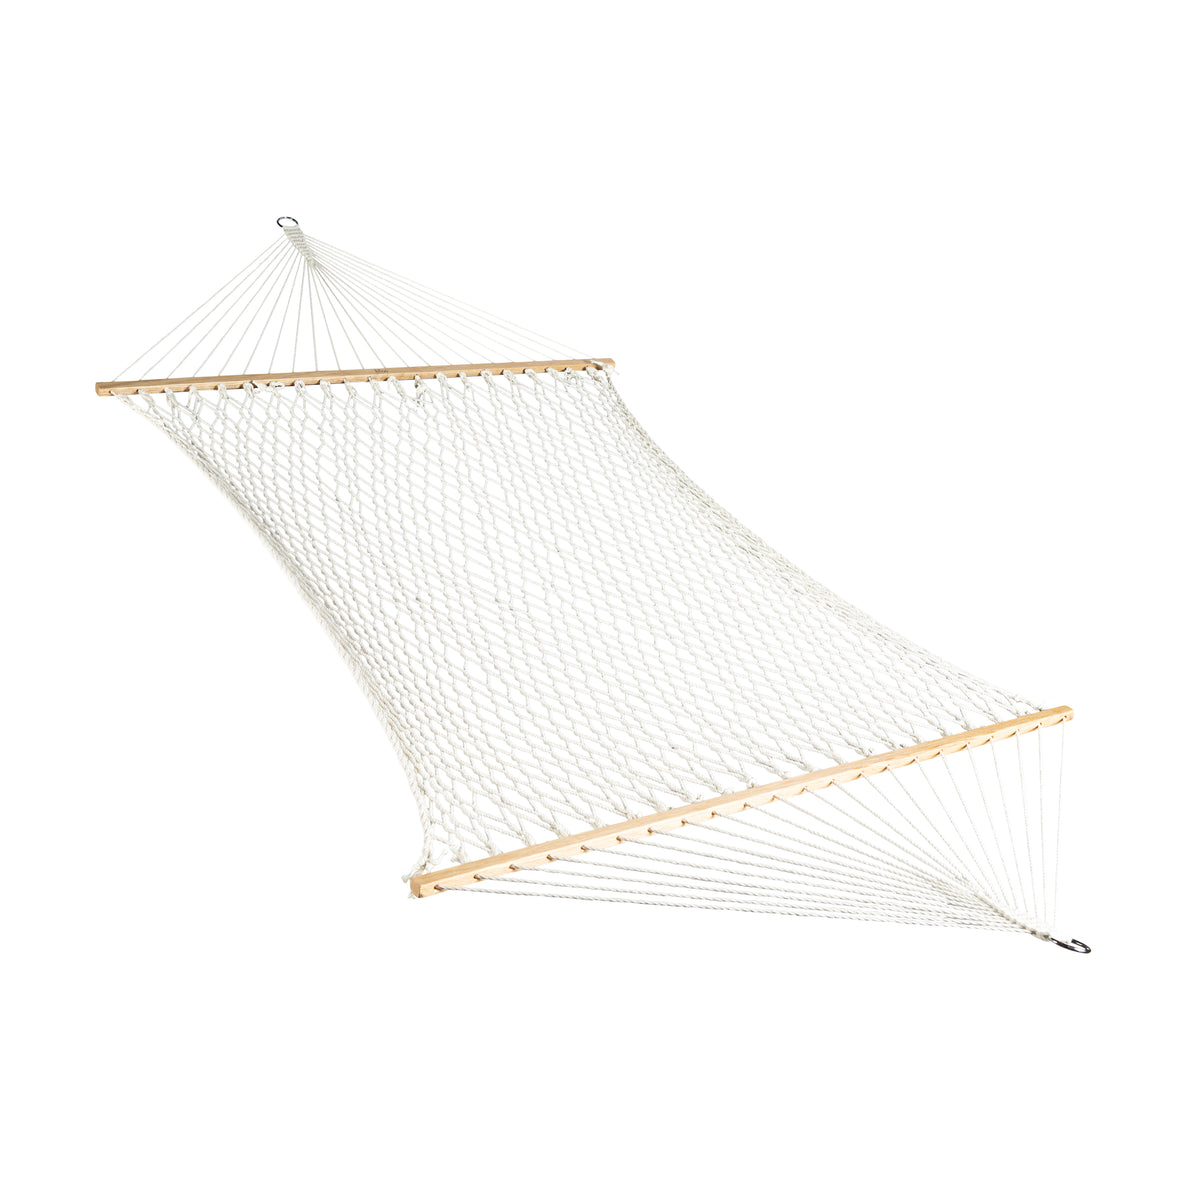 Bliss Hammocks 60-inch Wide Cotton Rope Hammock with Spreader Bar, S Hooks, and Chains in the white variation.